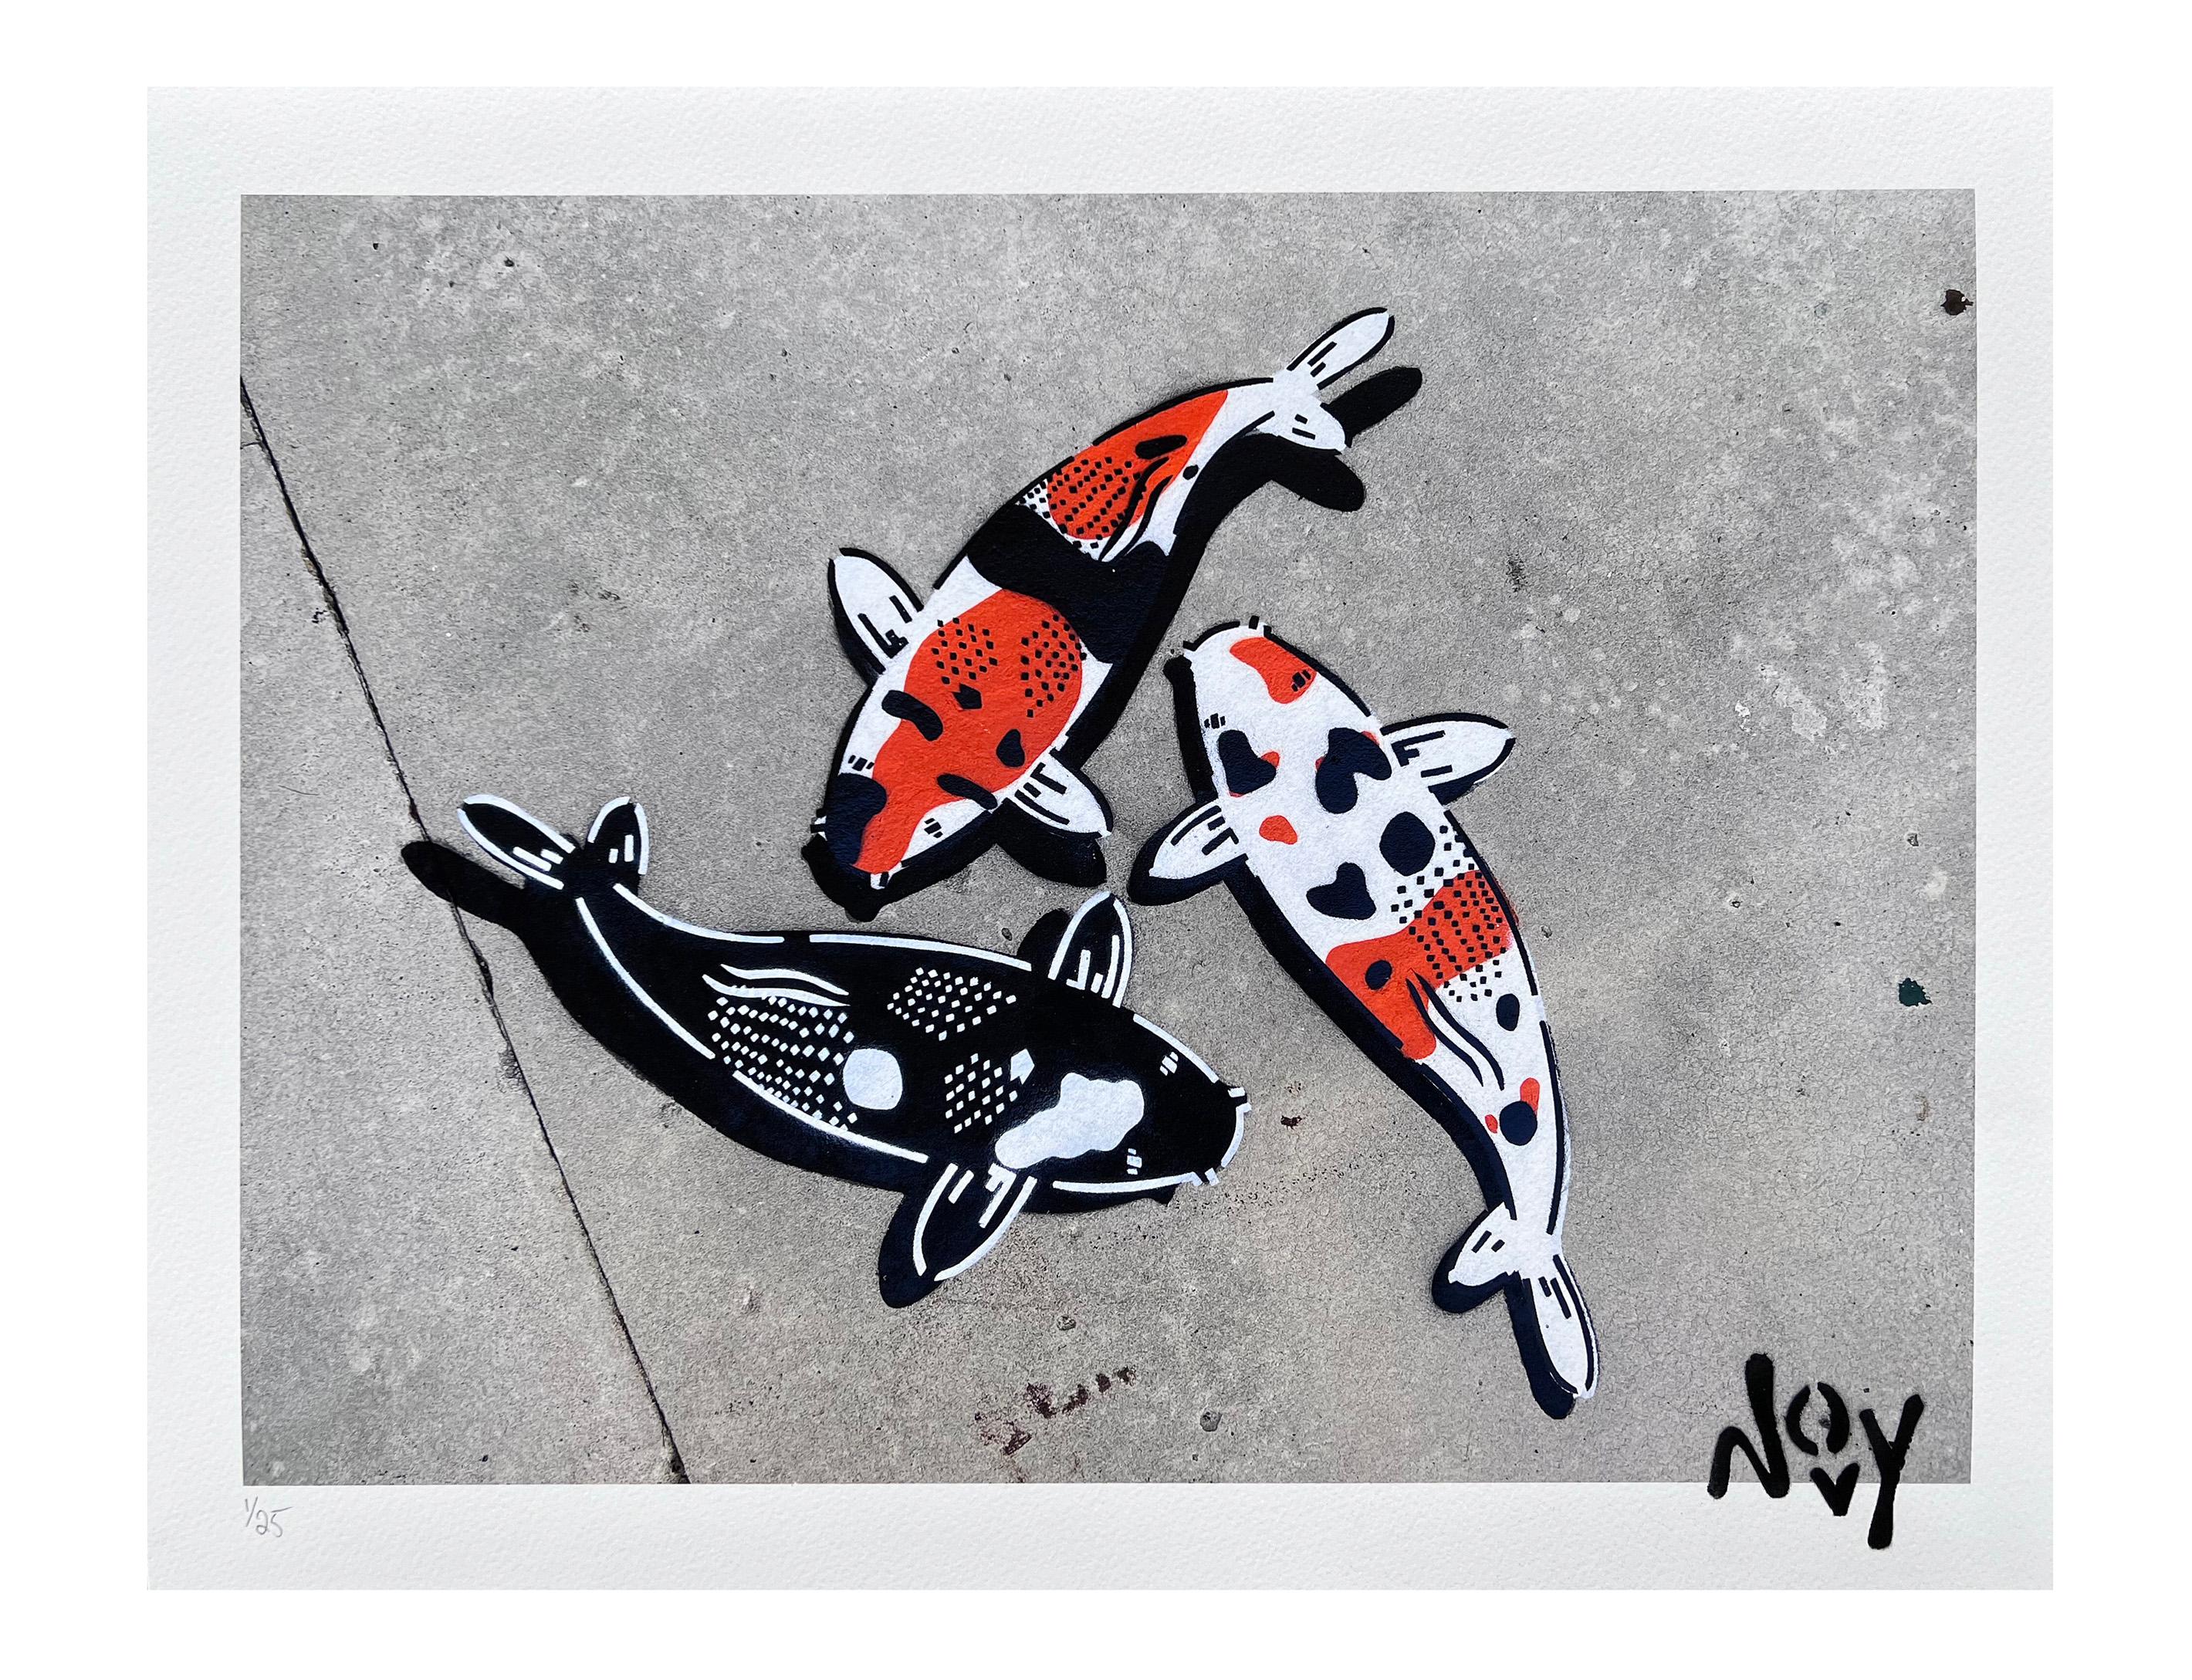 'Circle of Life Fine Art Print' is a limited edition koi fine art print by street artist Jeremy Novy. It measures 16 x 20 inches in size, with the printed image itself spanning 14 x 18 inches. This piece is part of a limited edition collection, with